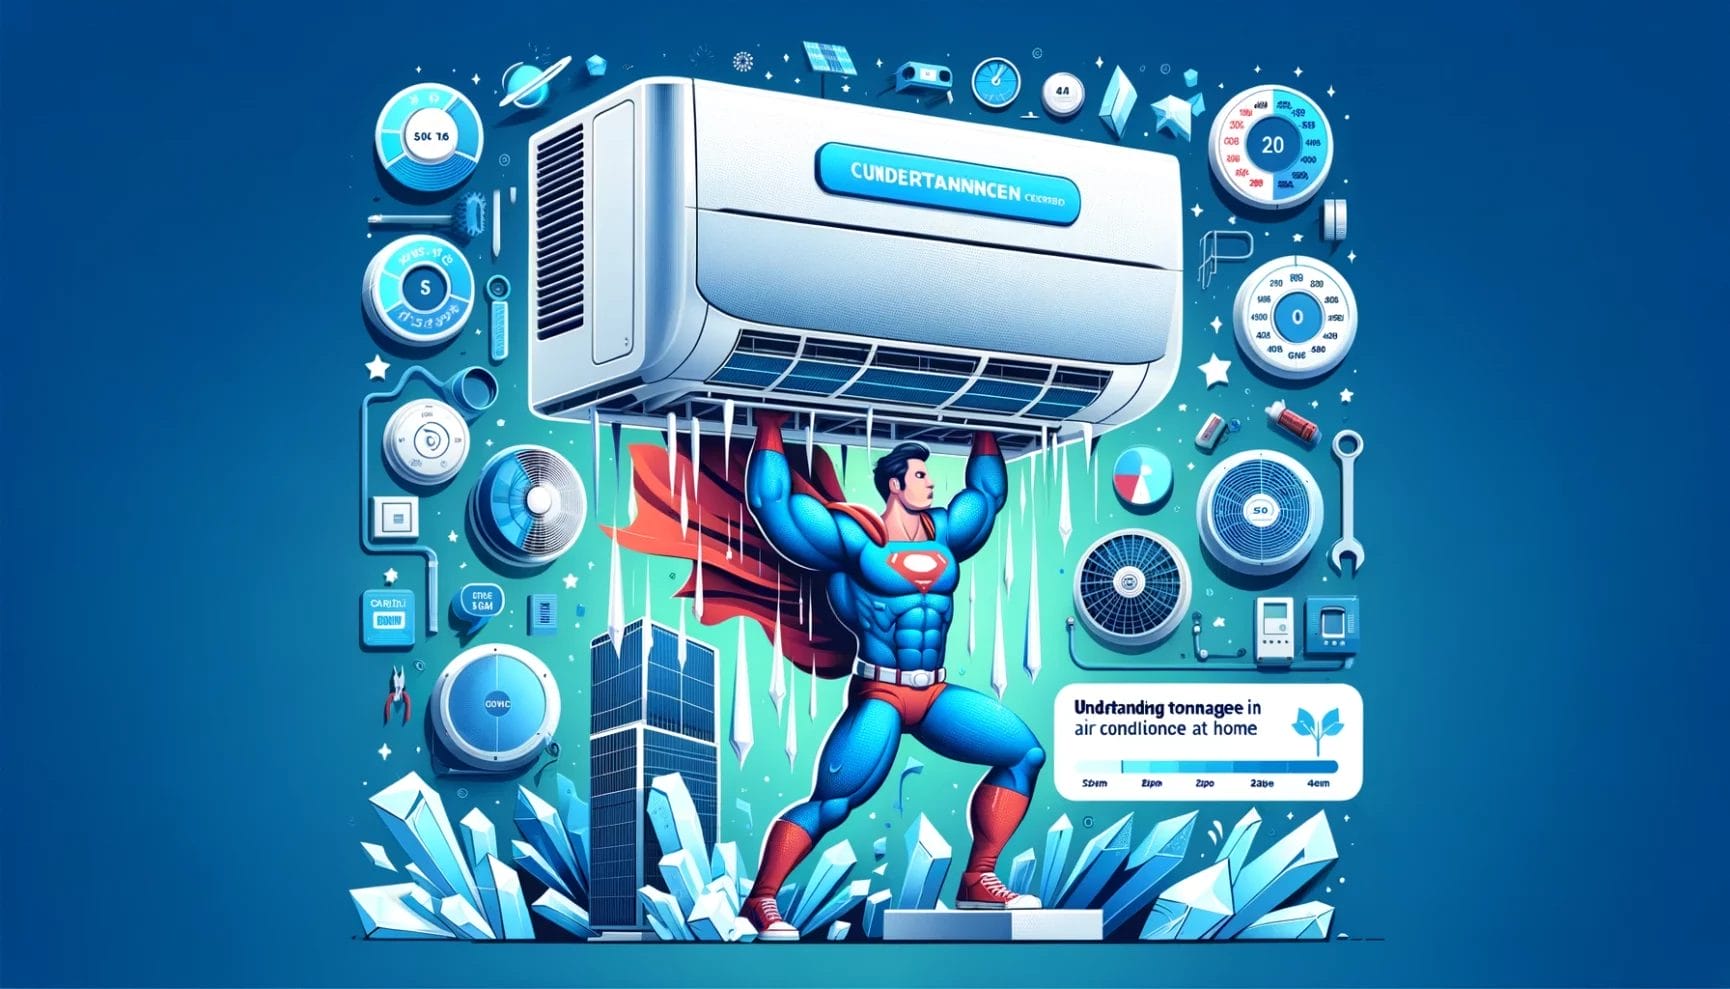 Superhero character showcasing the components and maintenance of a home air conditioning system.